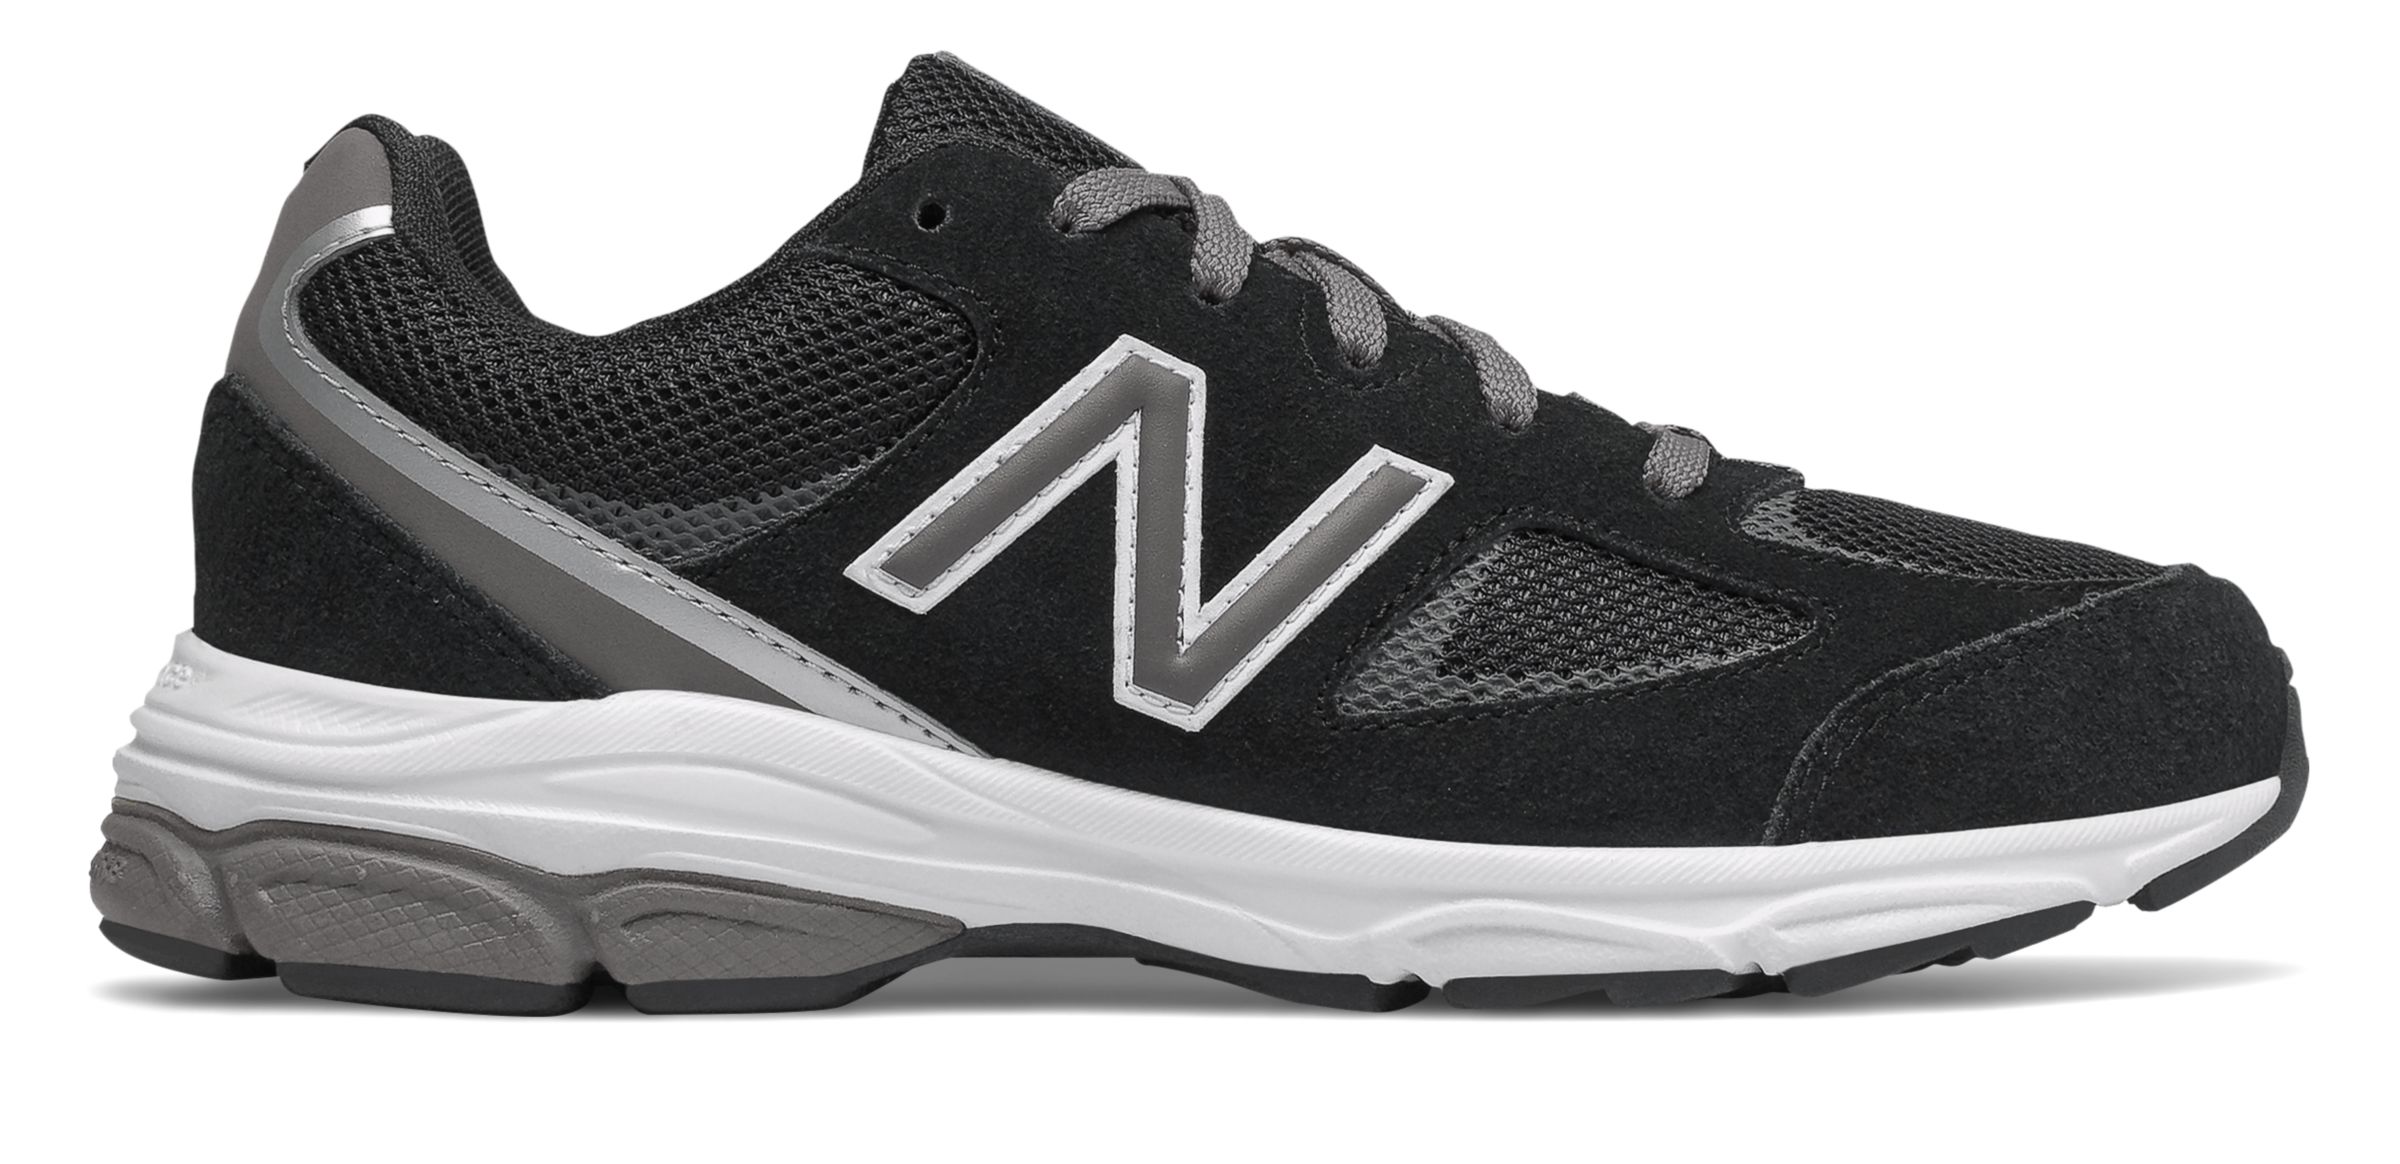 Wide Kids Shoes for Boys - New Balance